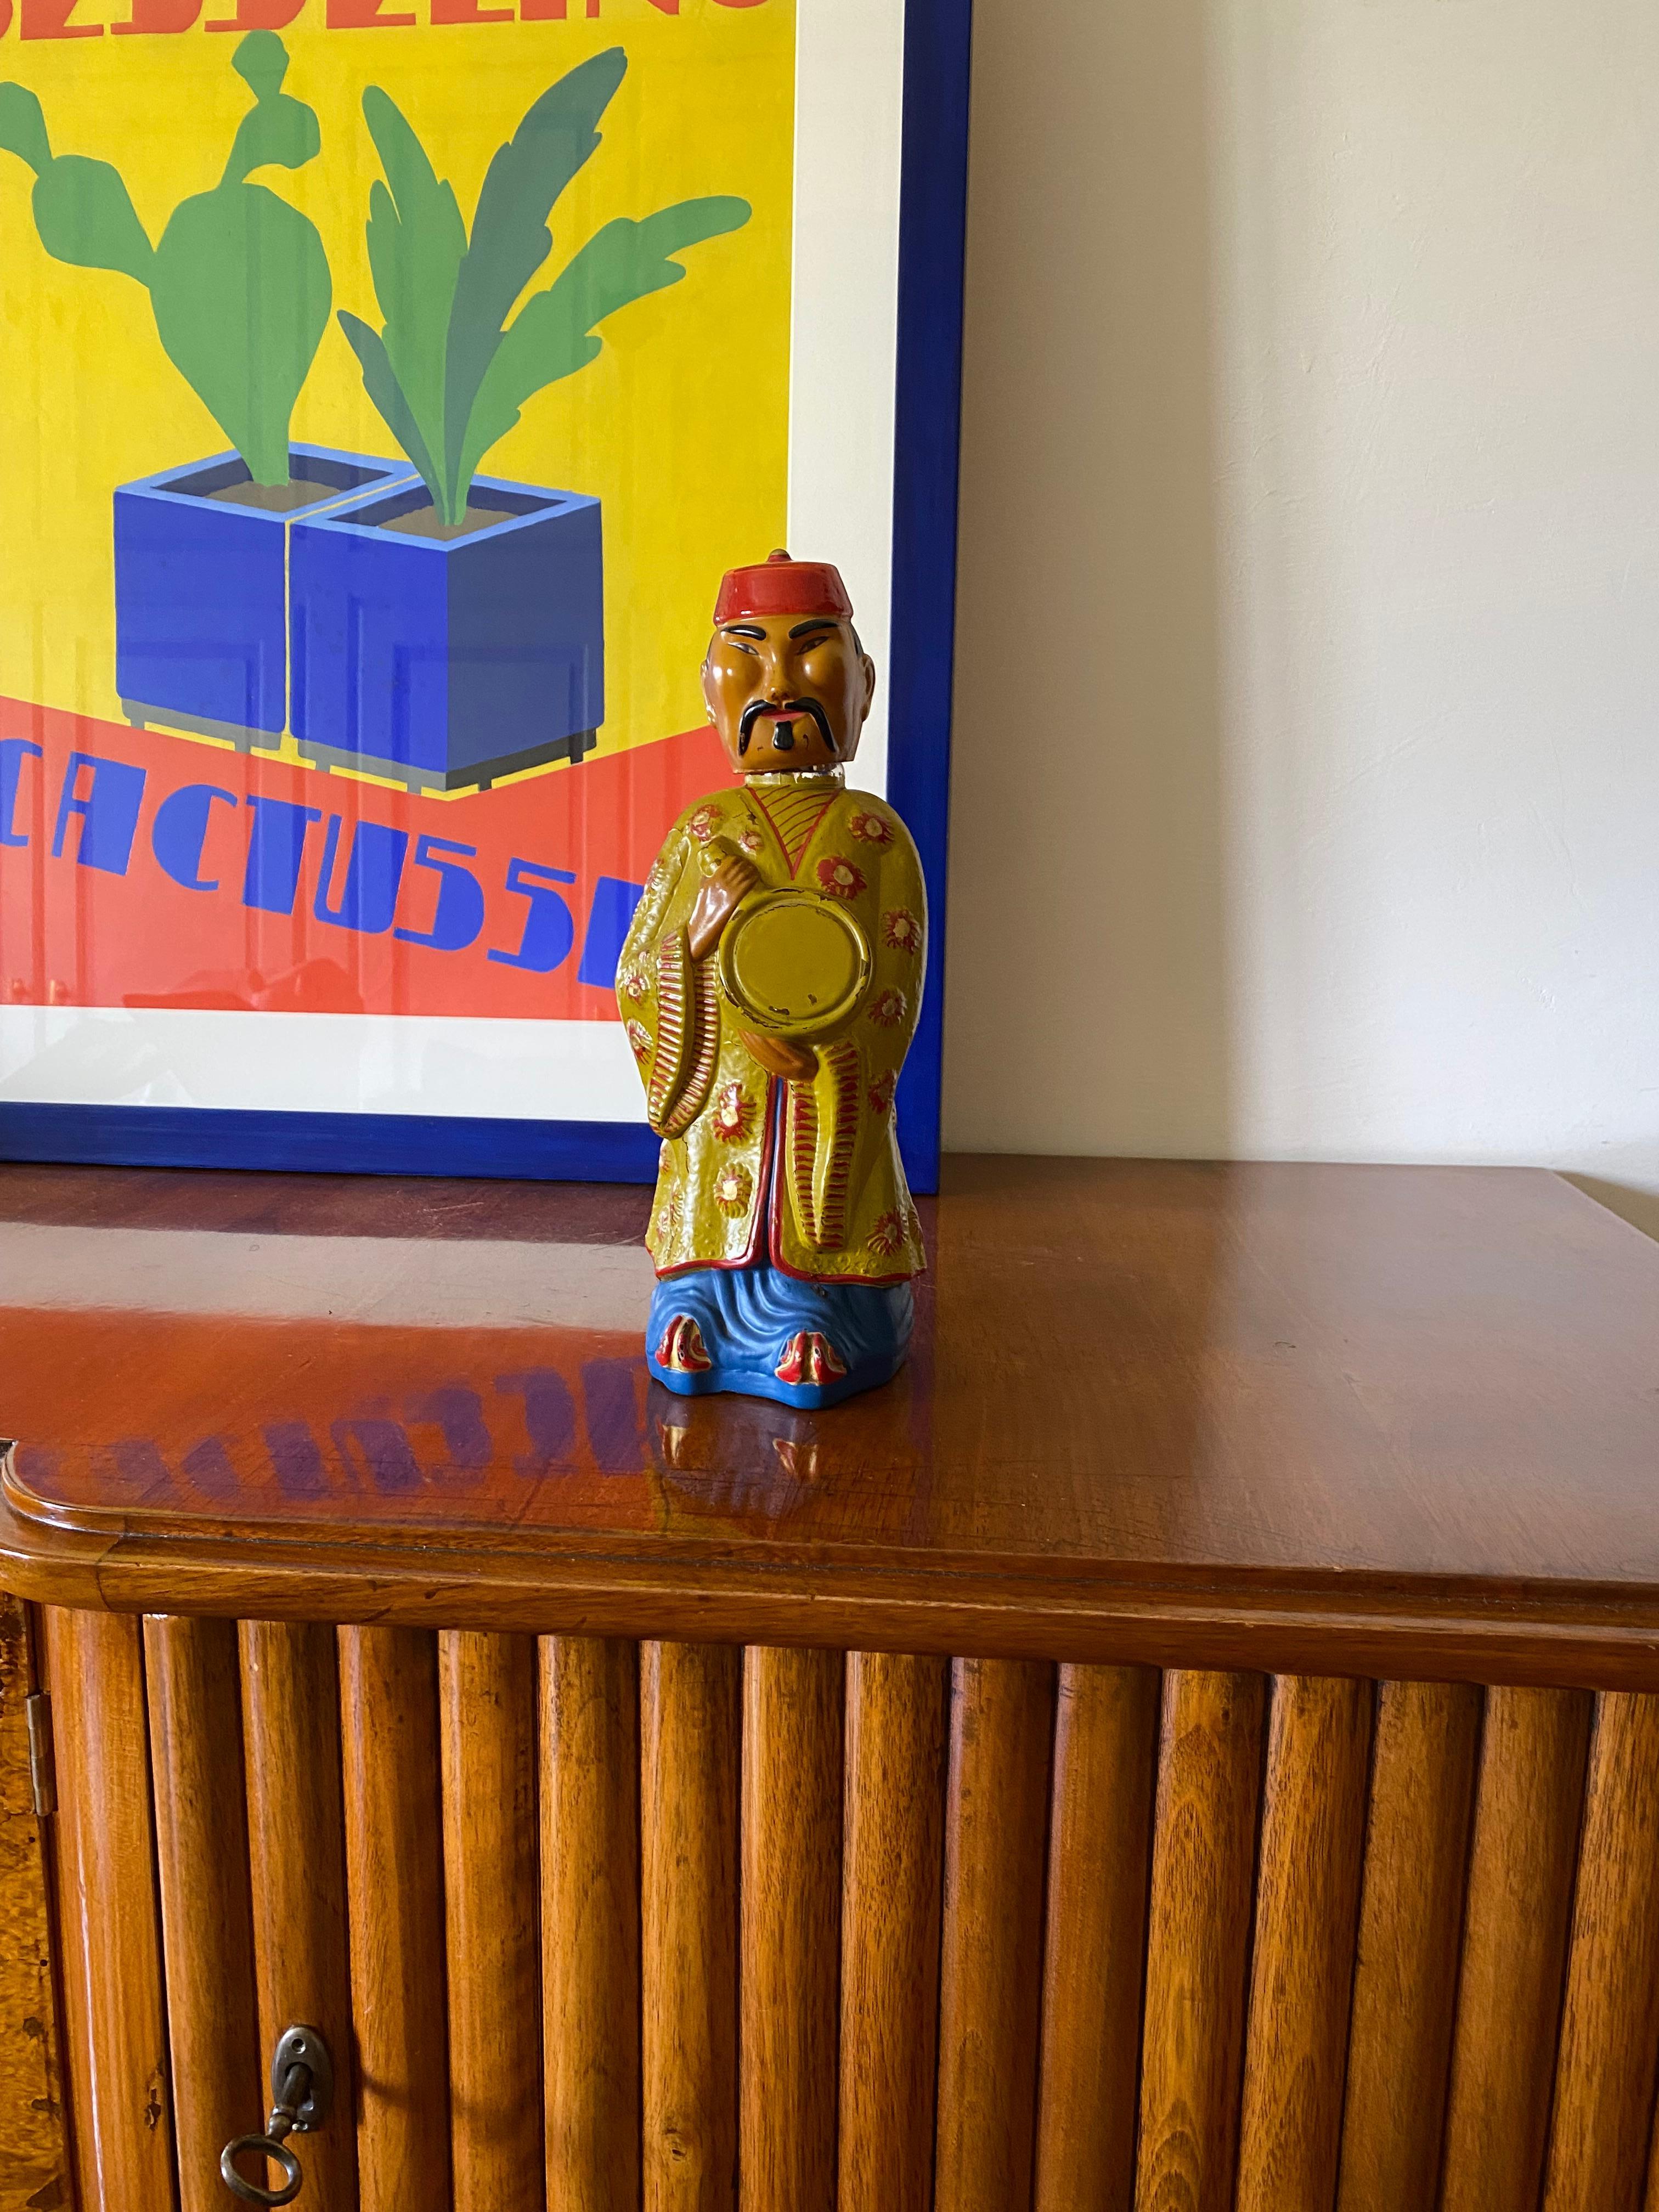 Midcentury hand painted glass bottle in the shape of an Asian man in traditional clothing.

Viarengo, Italy, 1950s 

Labelled and marked on the base

28.5 cm H

Conditions: perfect, as good as new